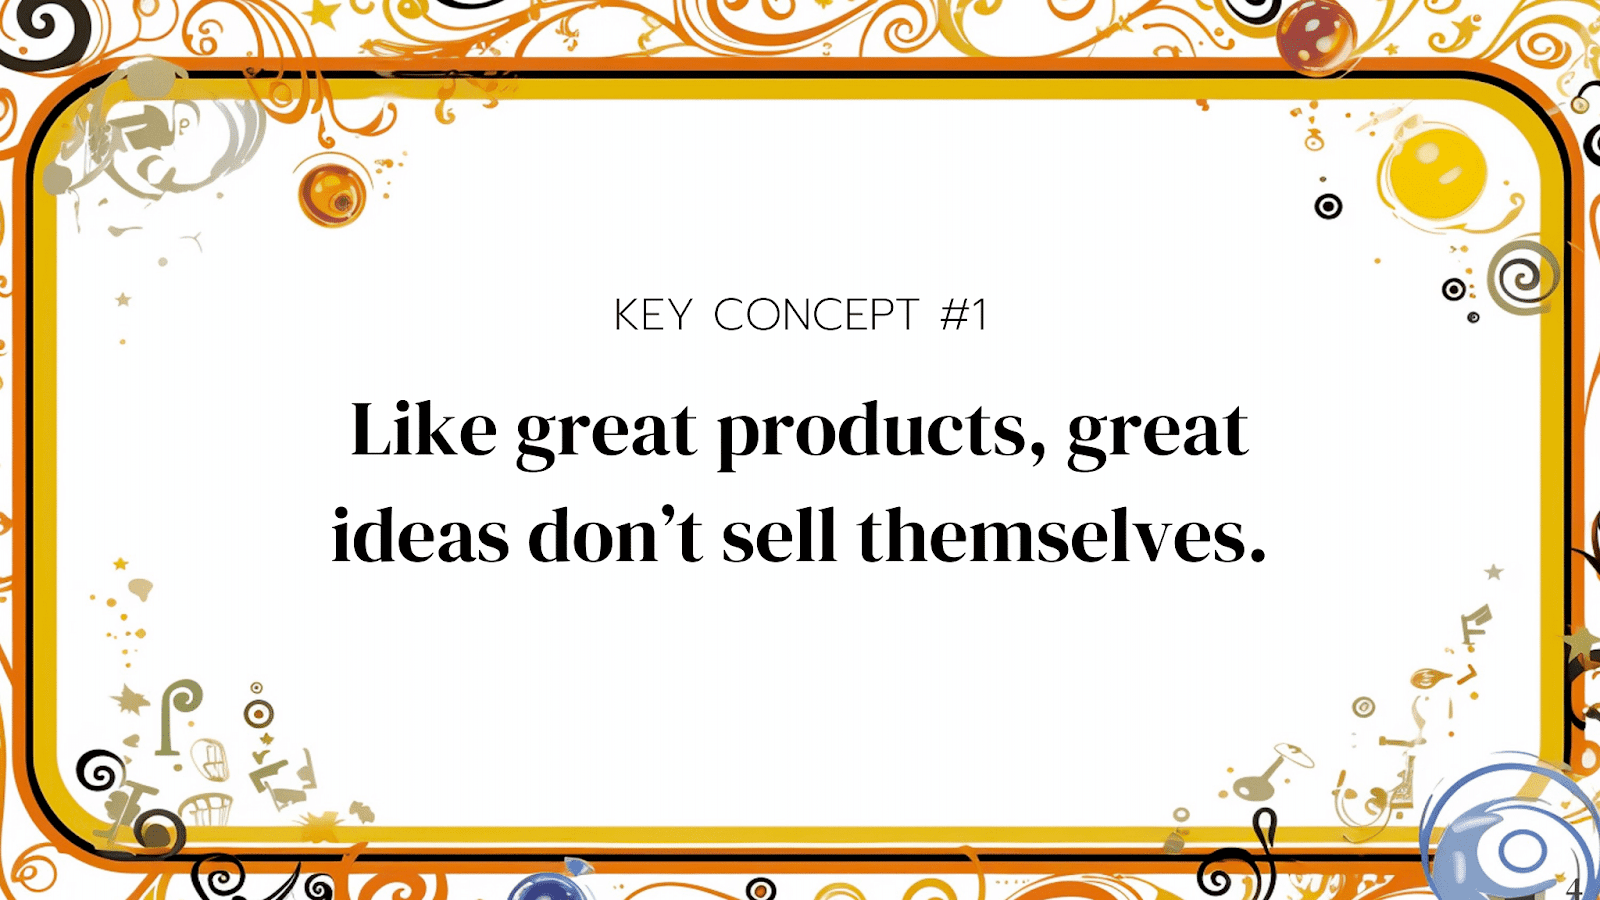 Key concept #1: Like great products, great ideas don't sell themselves.